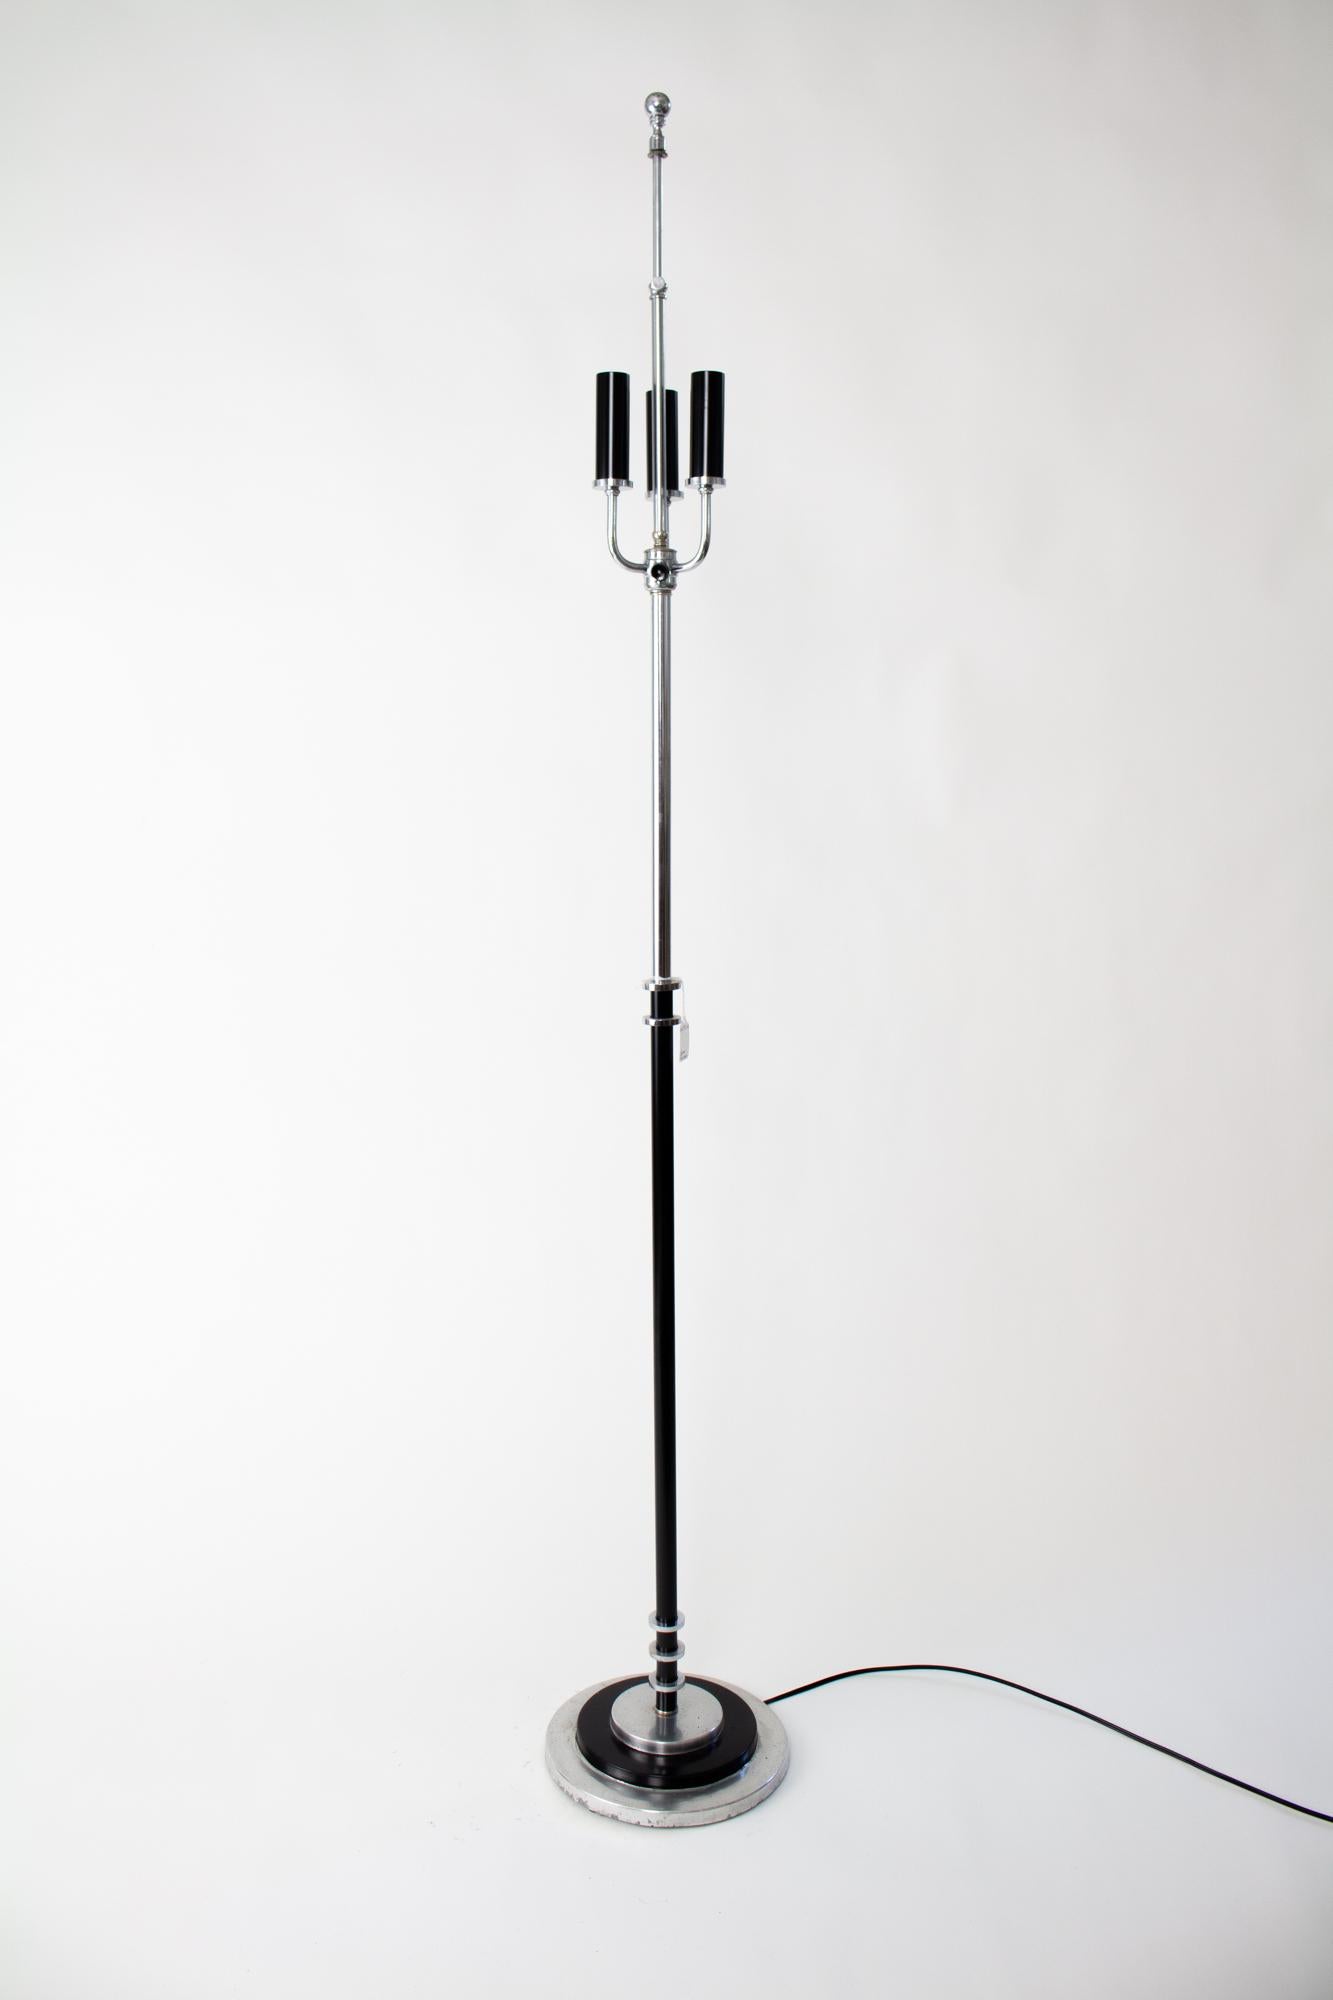 Early 20th Century art deco chrome and black floor lamp with string lampshade. Art Deco modernist styling in a silver and black floor lamp. Metals are a combination of chrome plated and aluminum. Three candle lights, with standard base black